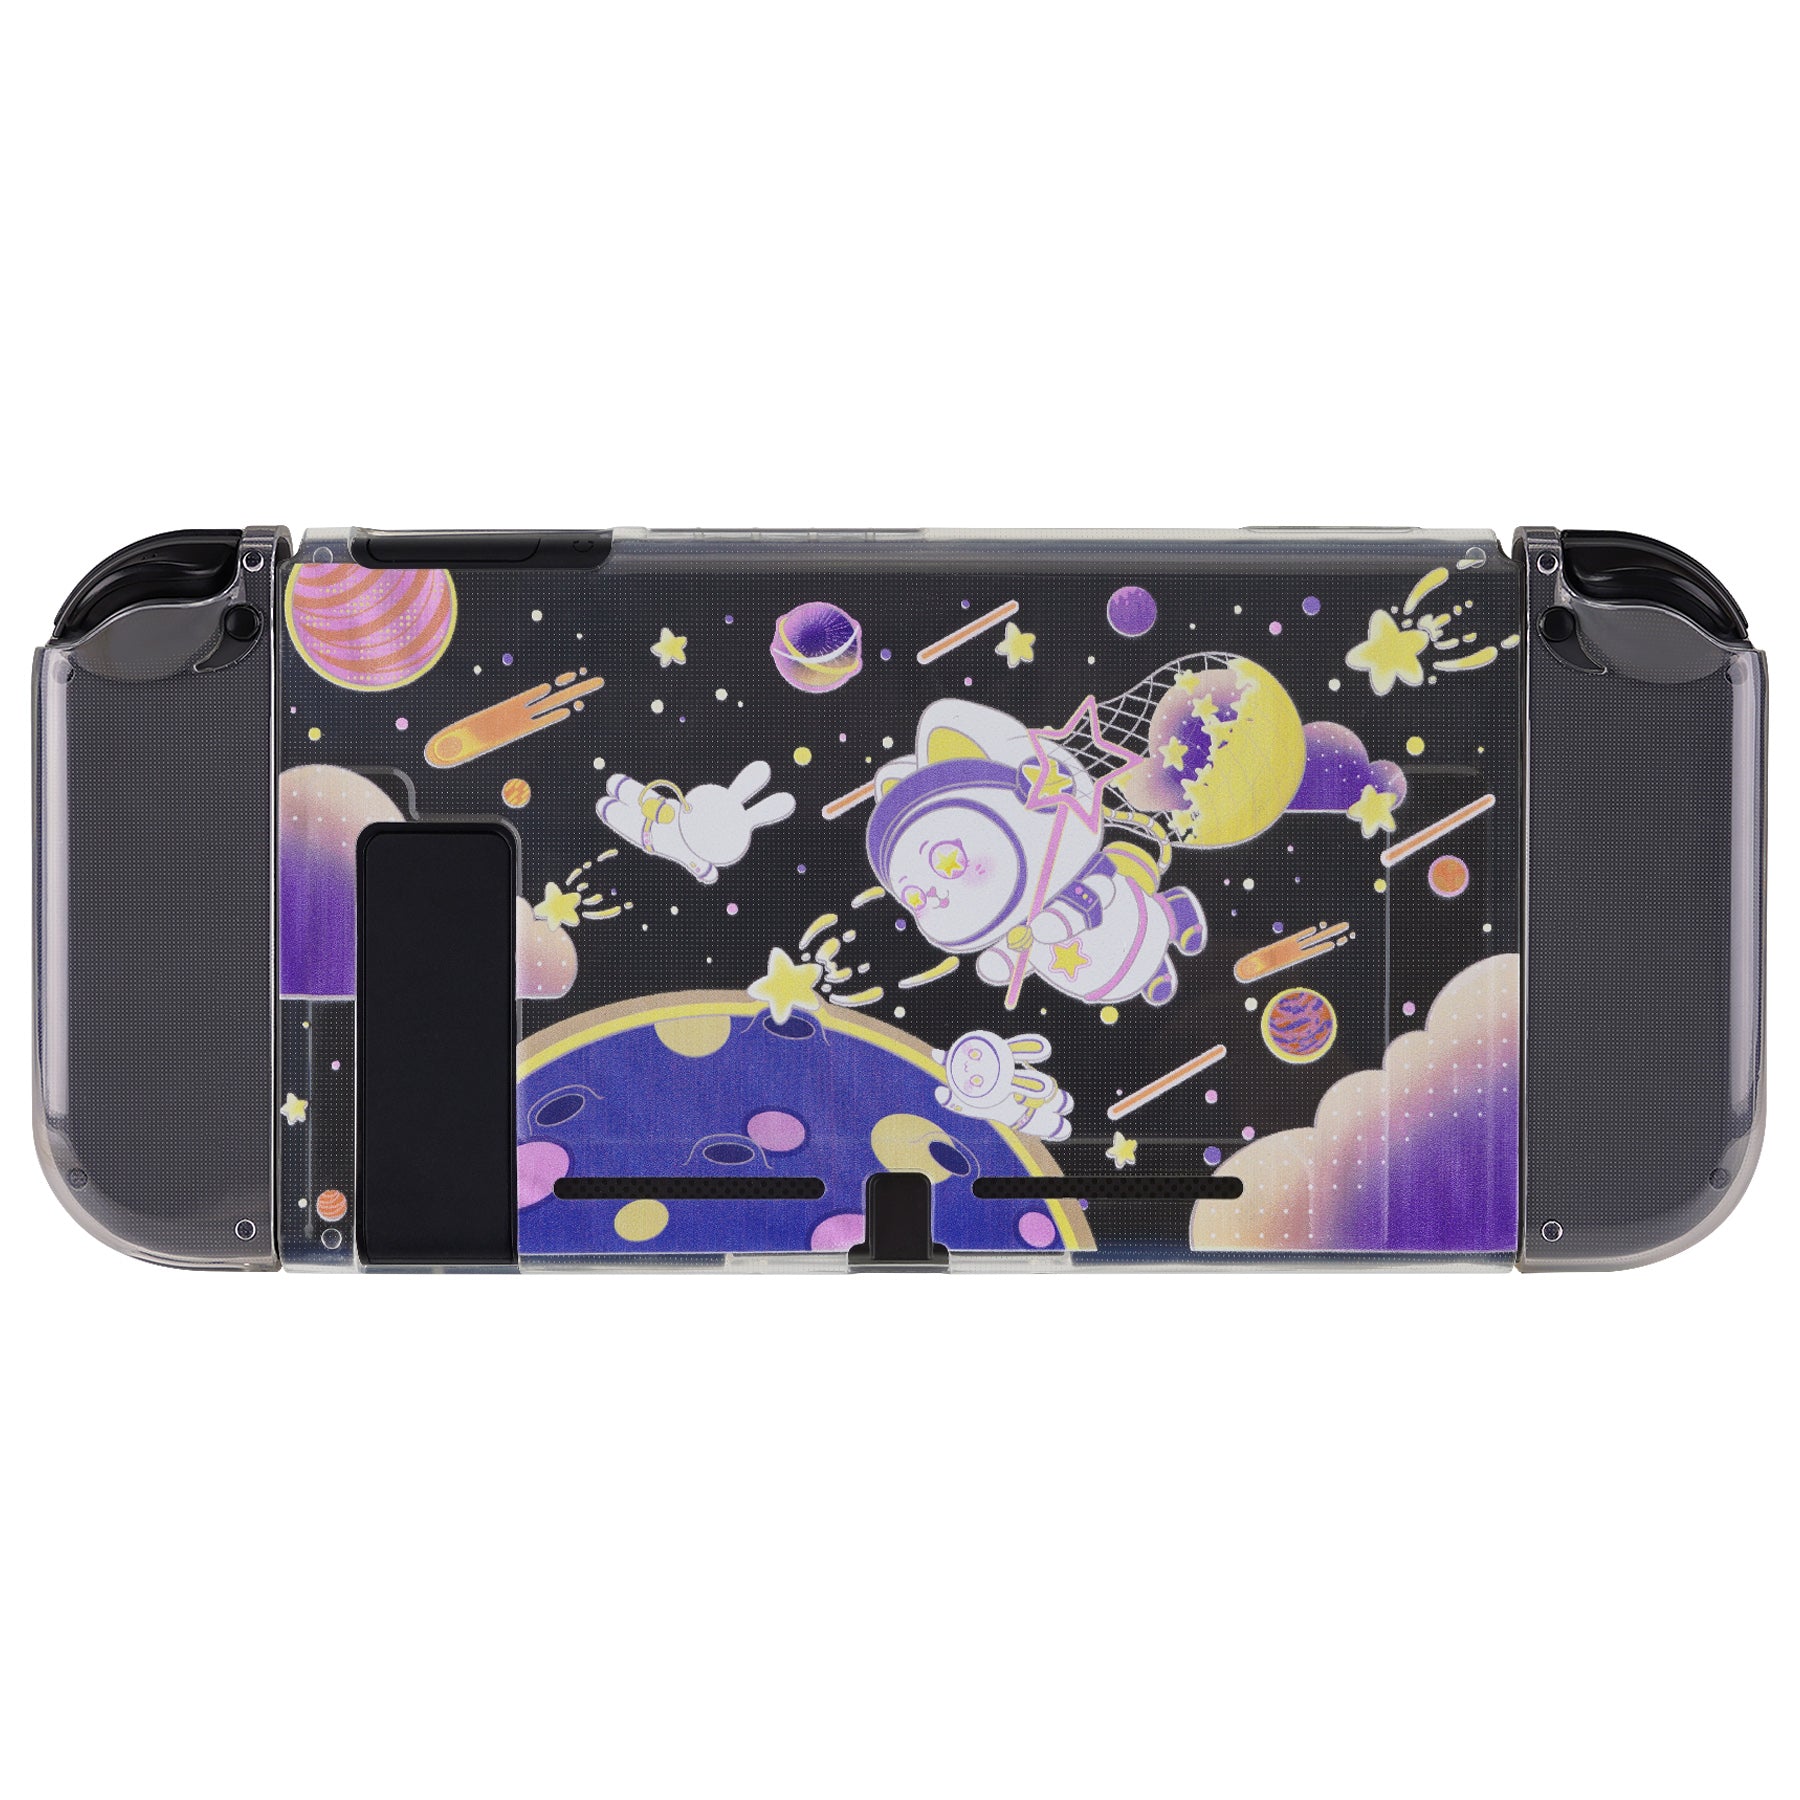 PlayVital Protective Case for Nintendo Switch, Soft TPU Slim Case Cover for Nintendo Switch Joycon Console with Purple ABXY Direction Button Caps - Space Cat - NTU6031 PlayVital